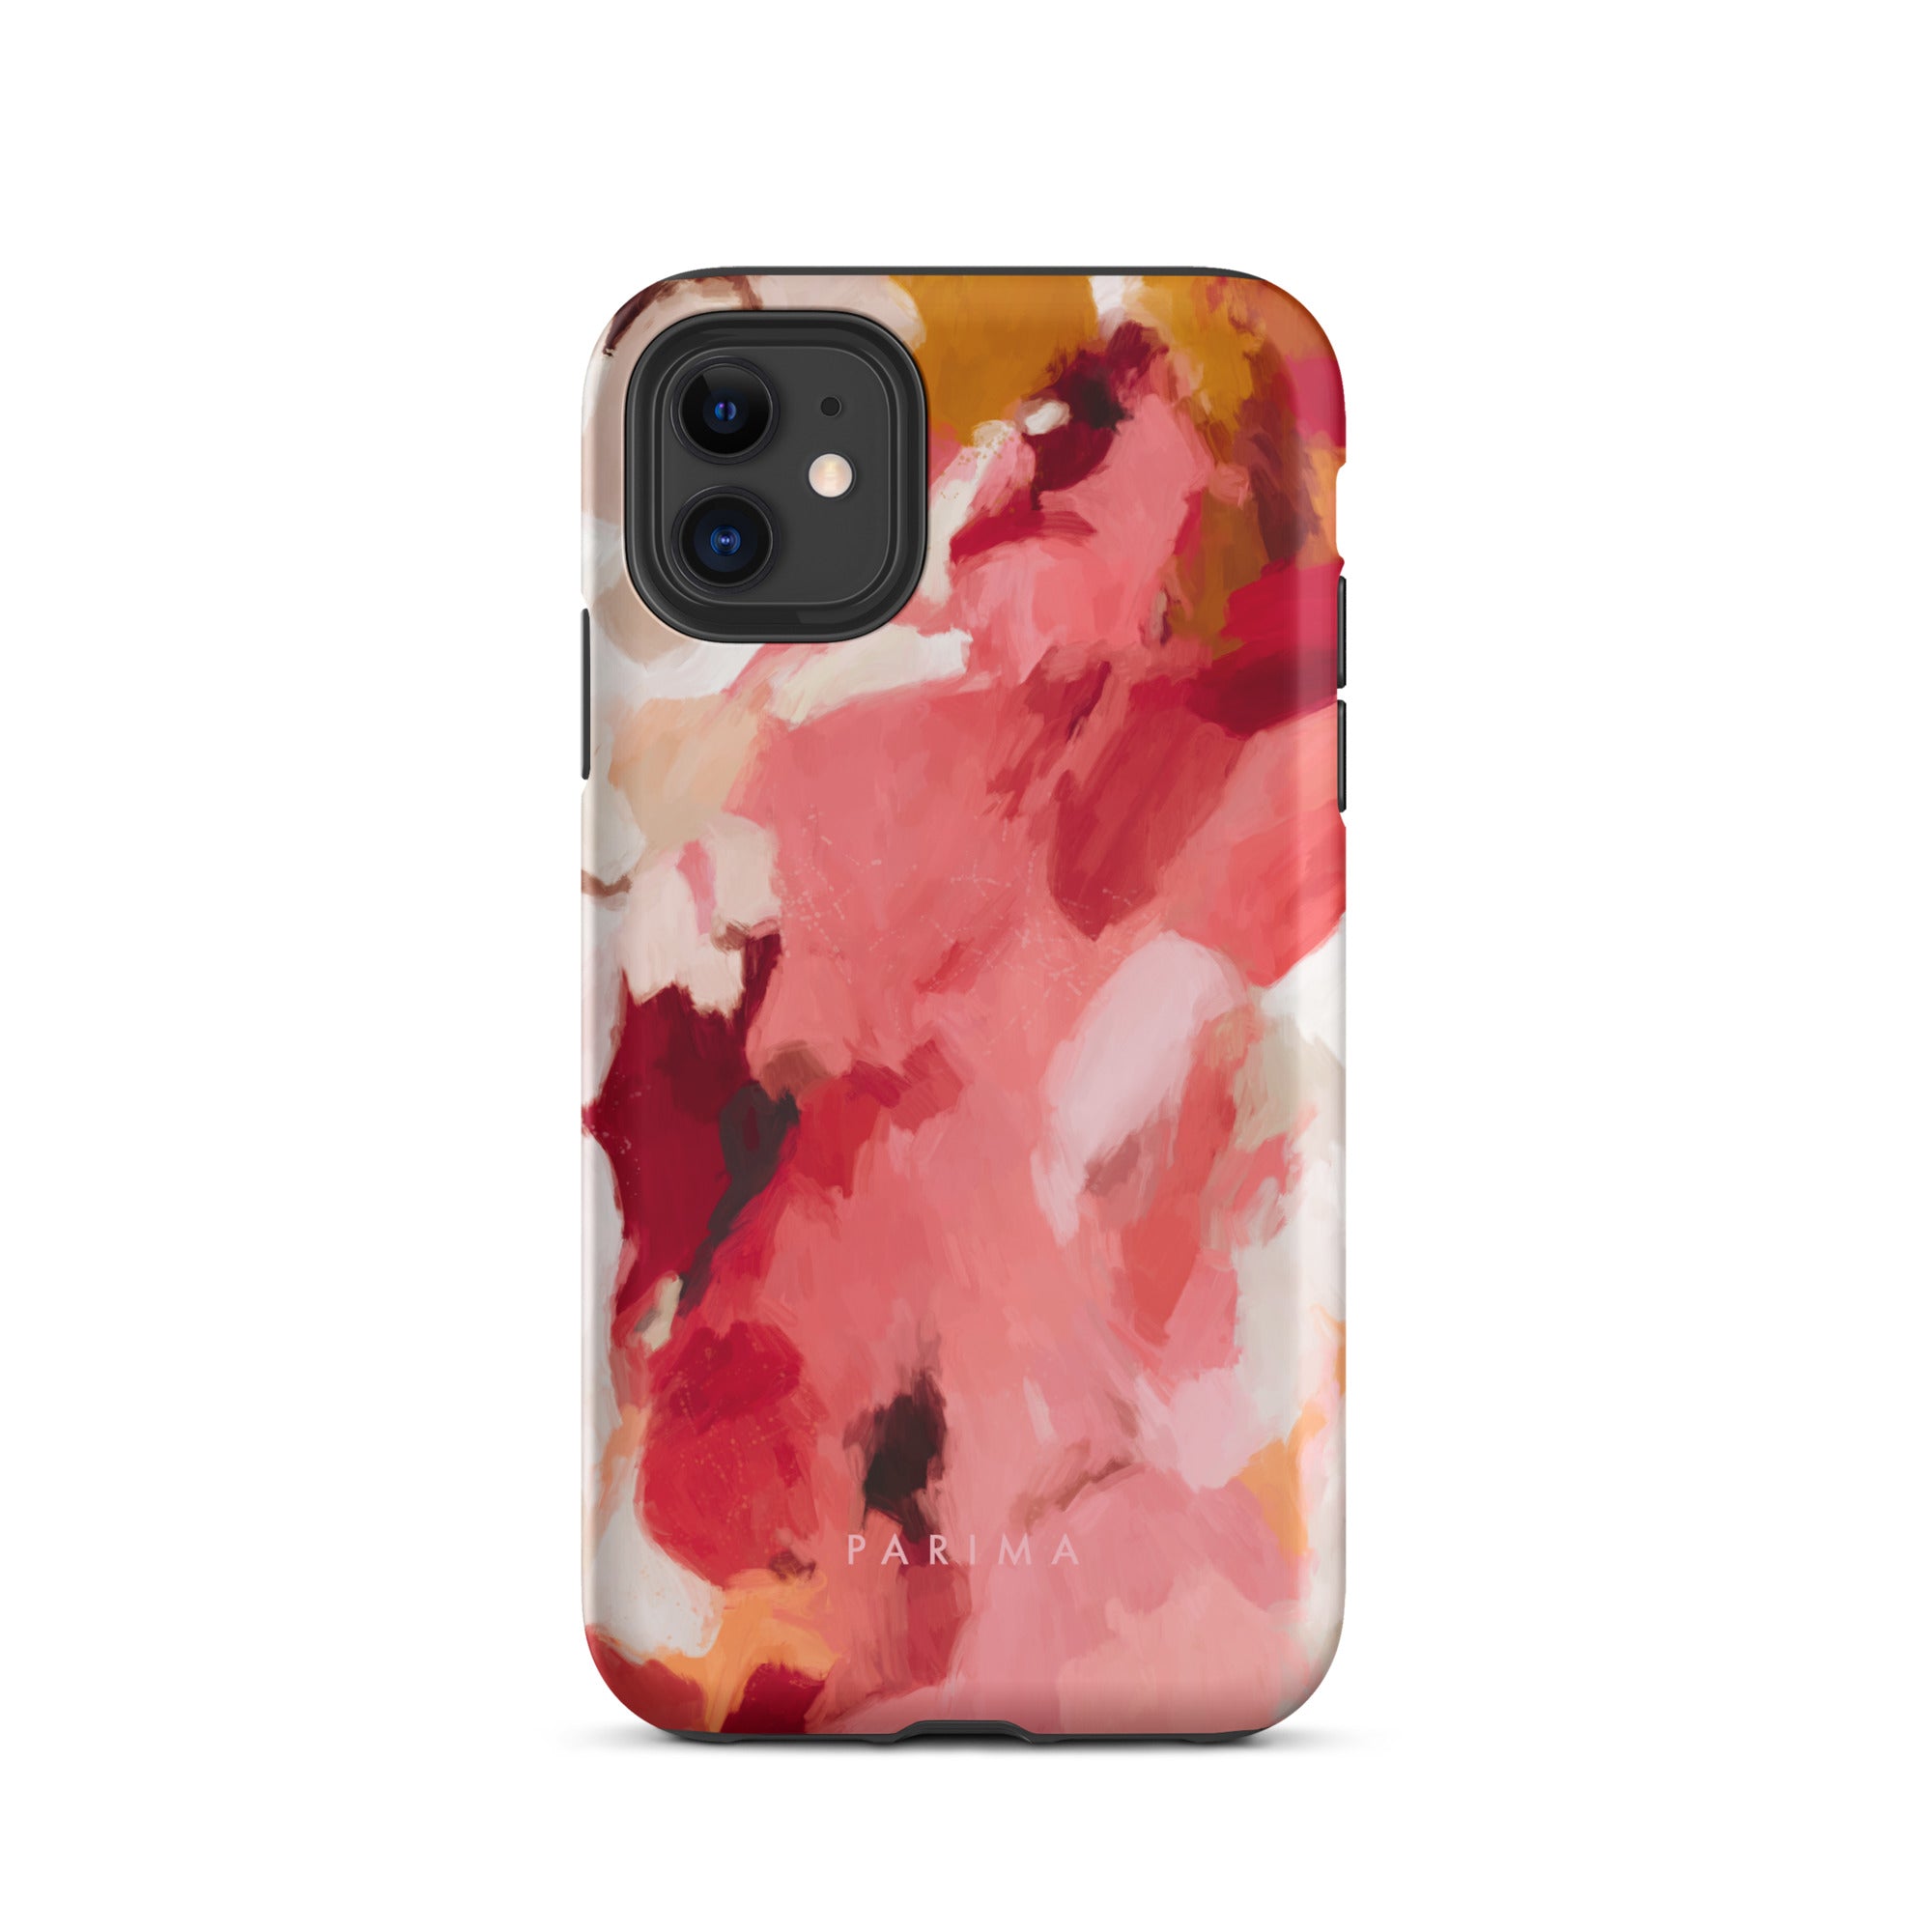 Apple, red and pink abstract art - iPhone 11 tough case by Parima Studio